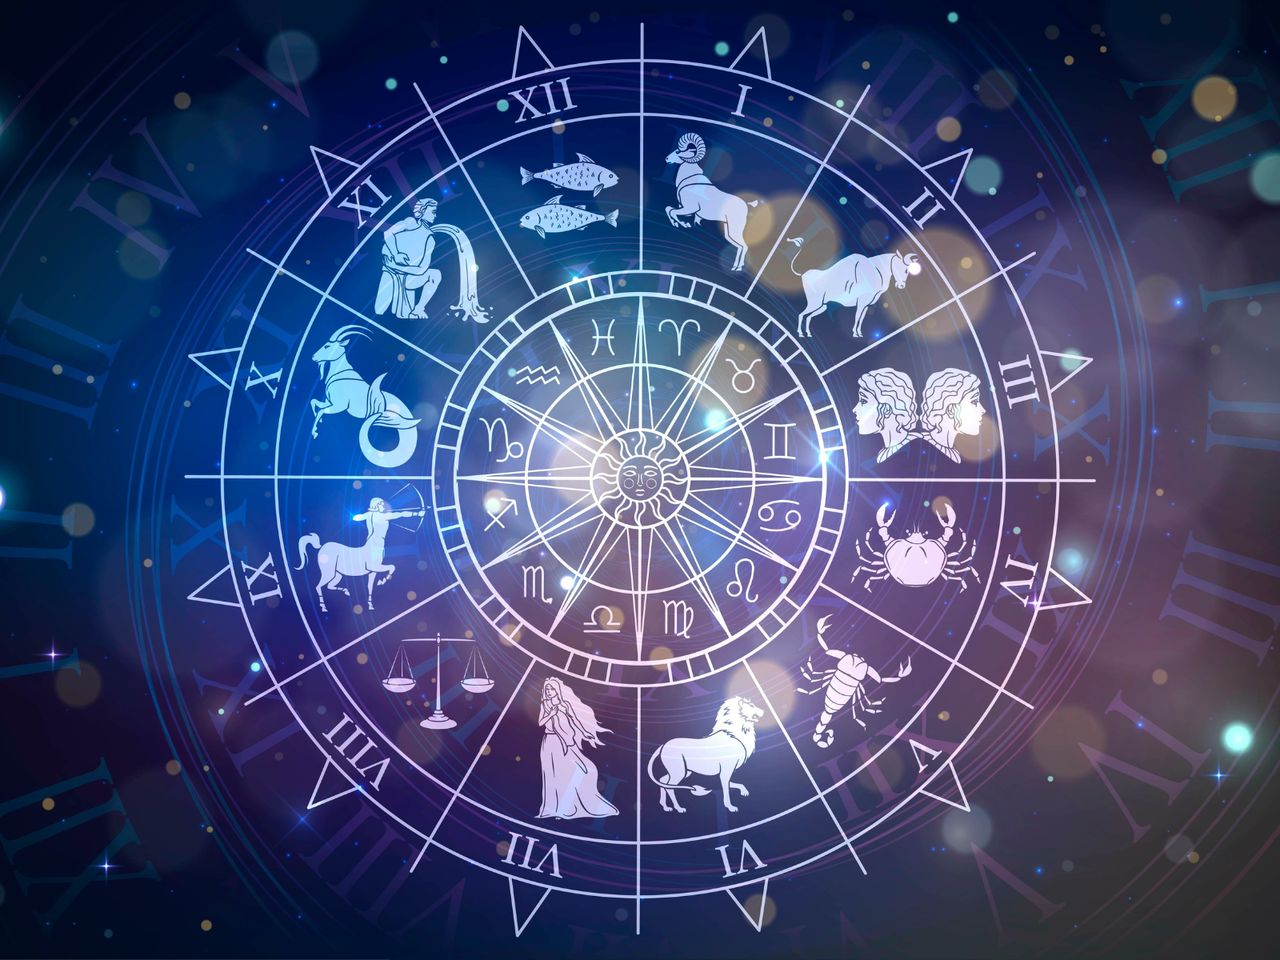 Exploring the zodiac signs associated with gossip and deceit: Gemini, Scorpio, and Pisces